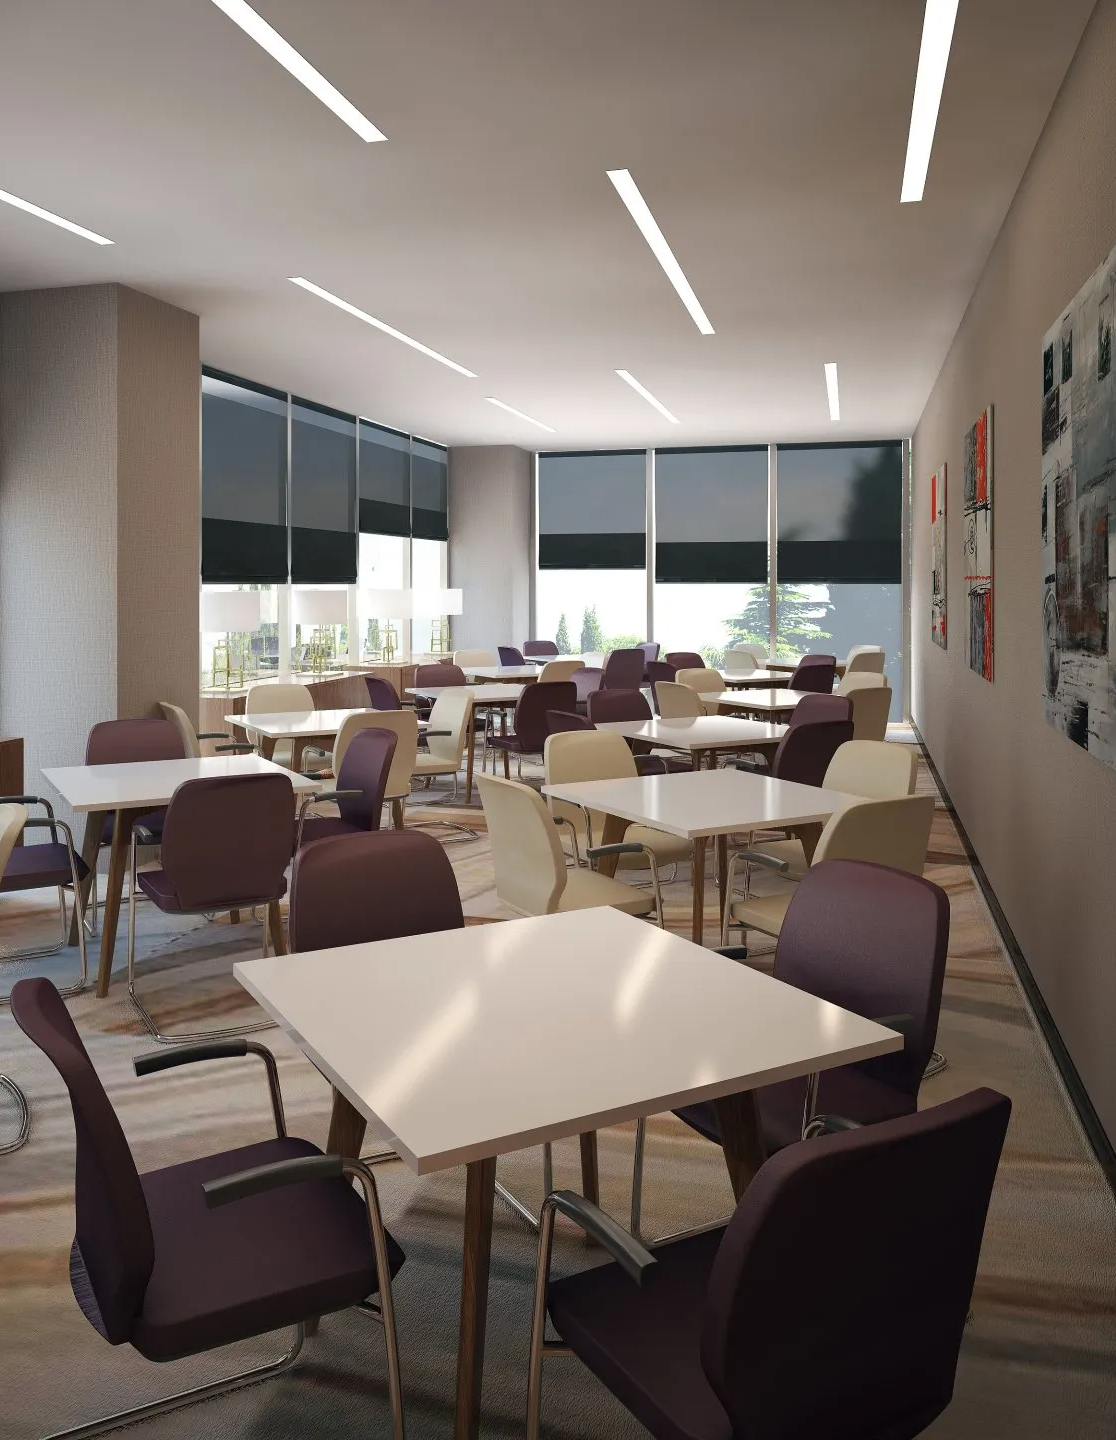 Multiple tables and chairs in dining area, framed by black roman blinds opening up to tree lined city scape.